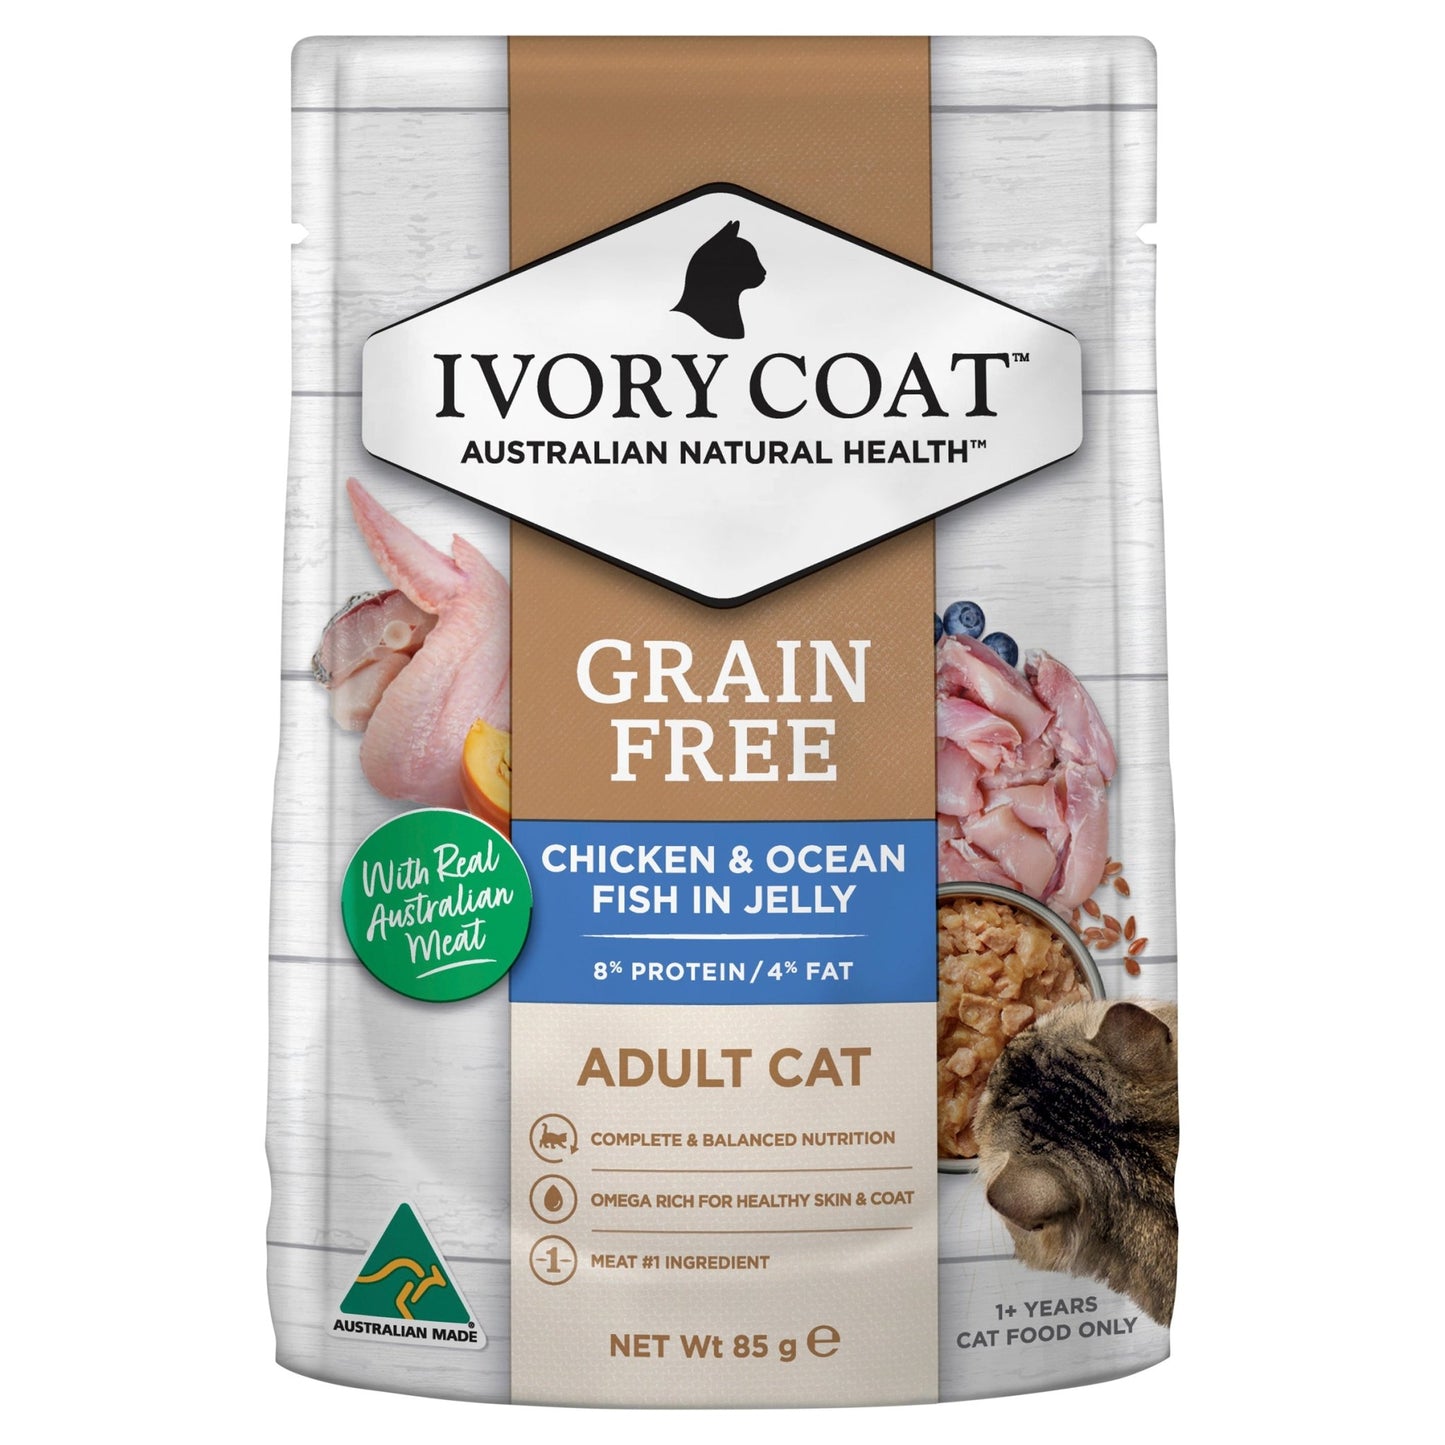 Ivory Coat Cat Wet Food Adult Chicken & Ocean Fish in Jelly 12x85g - Woonona Petfood & Produce